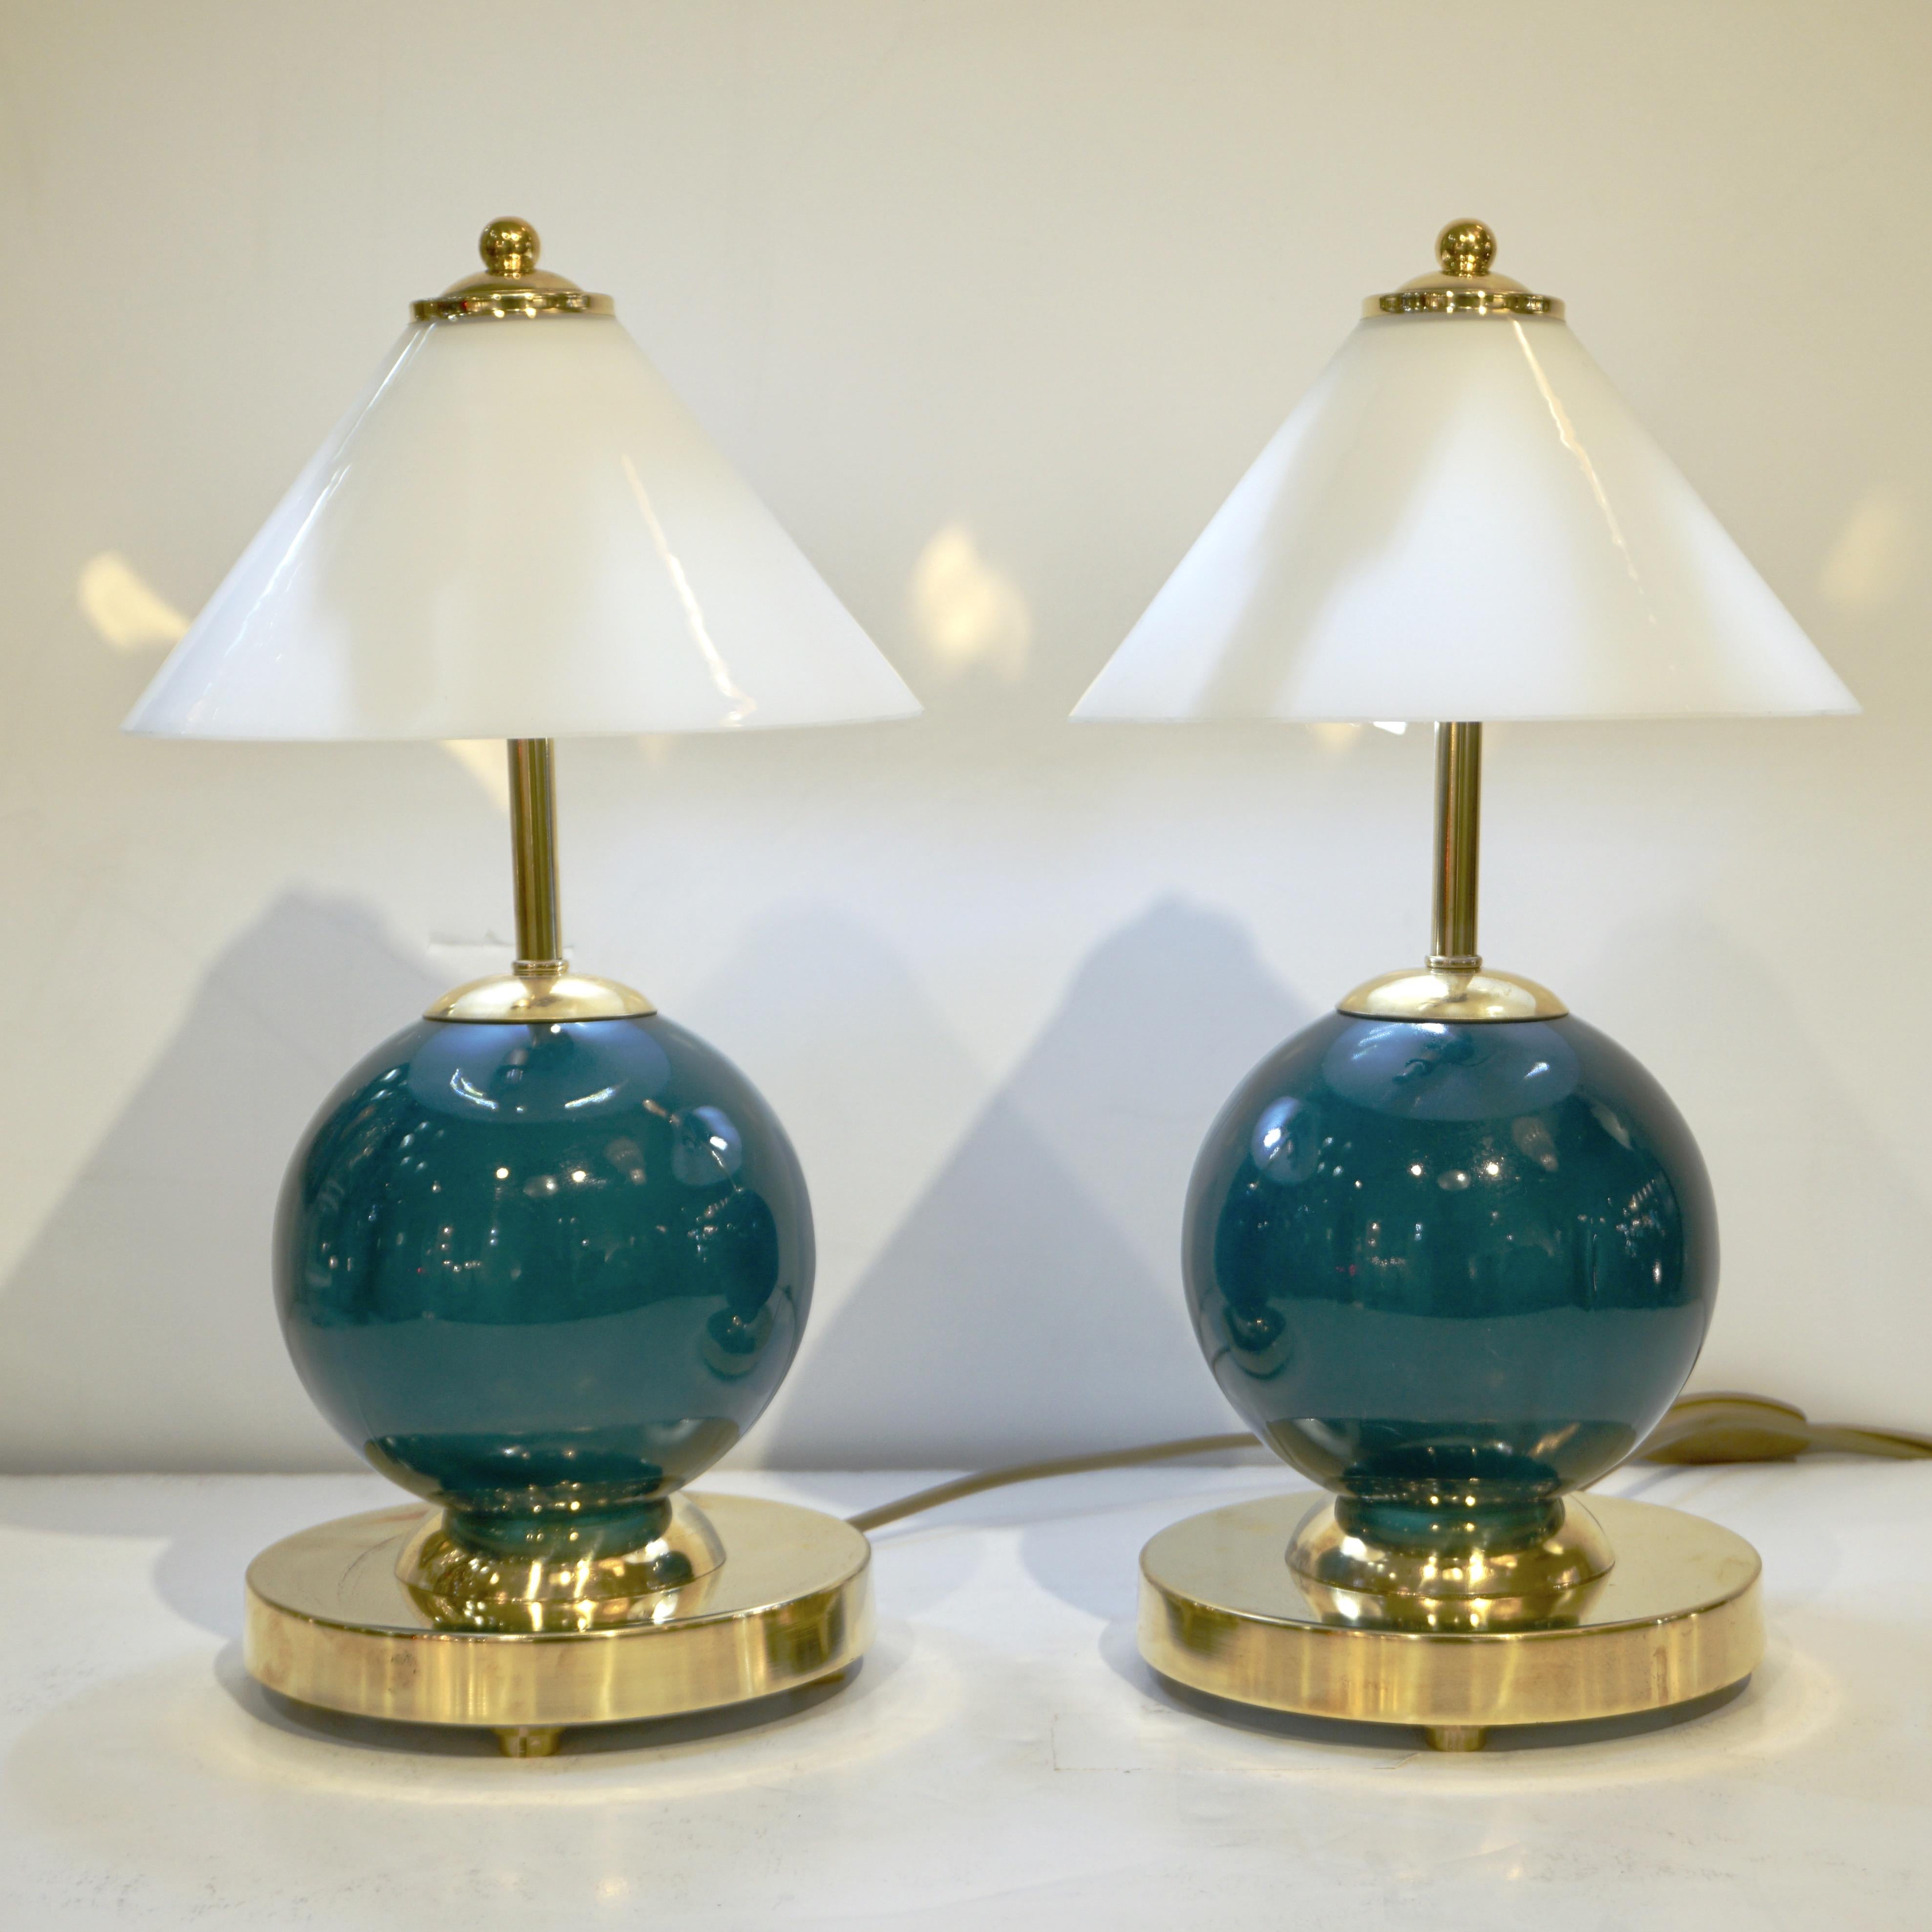 A one-of-a-kind unusual and delightful pair of lamps, entirely handcrafted in Italy, their size makes them ideal for nightstands in bedrooms or on a desk. The central sphere, in Murano glass with a green color to look like jade, sits on a double